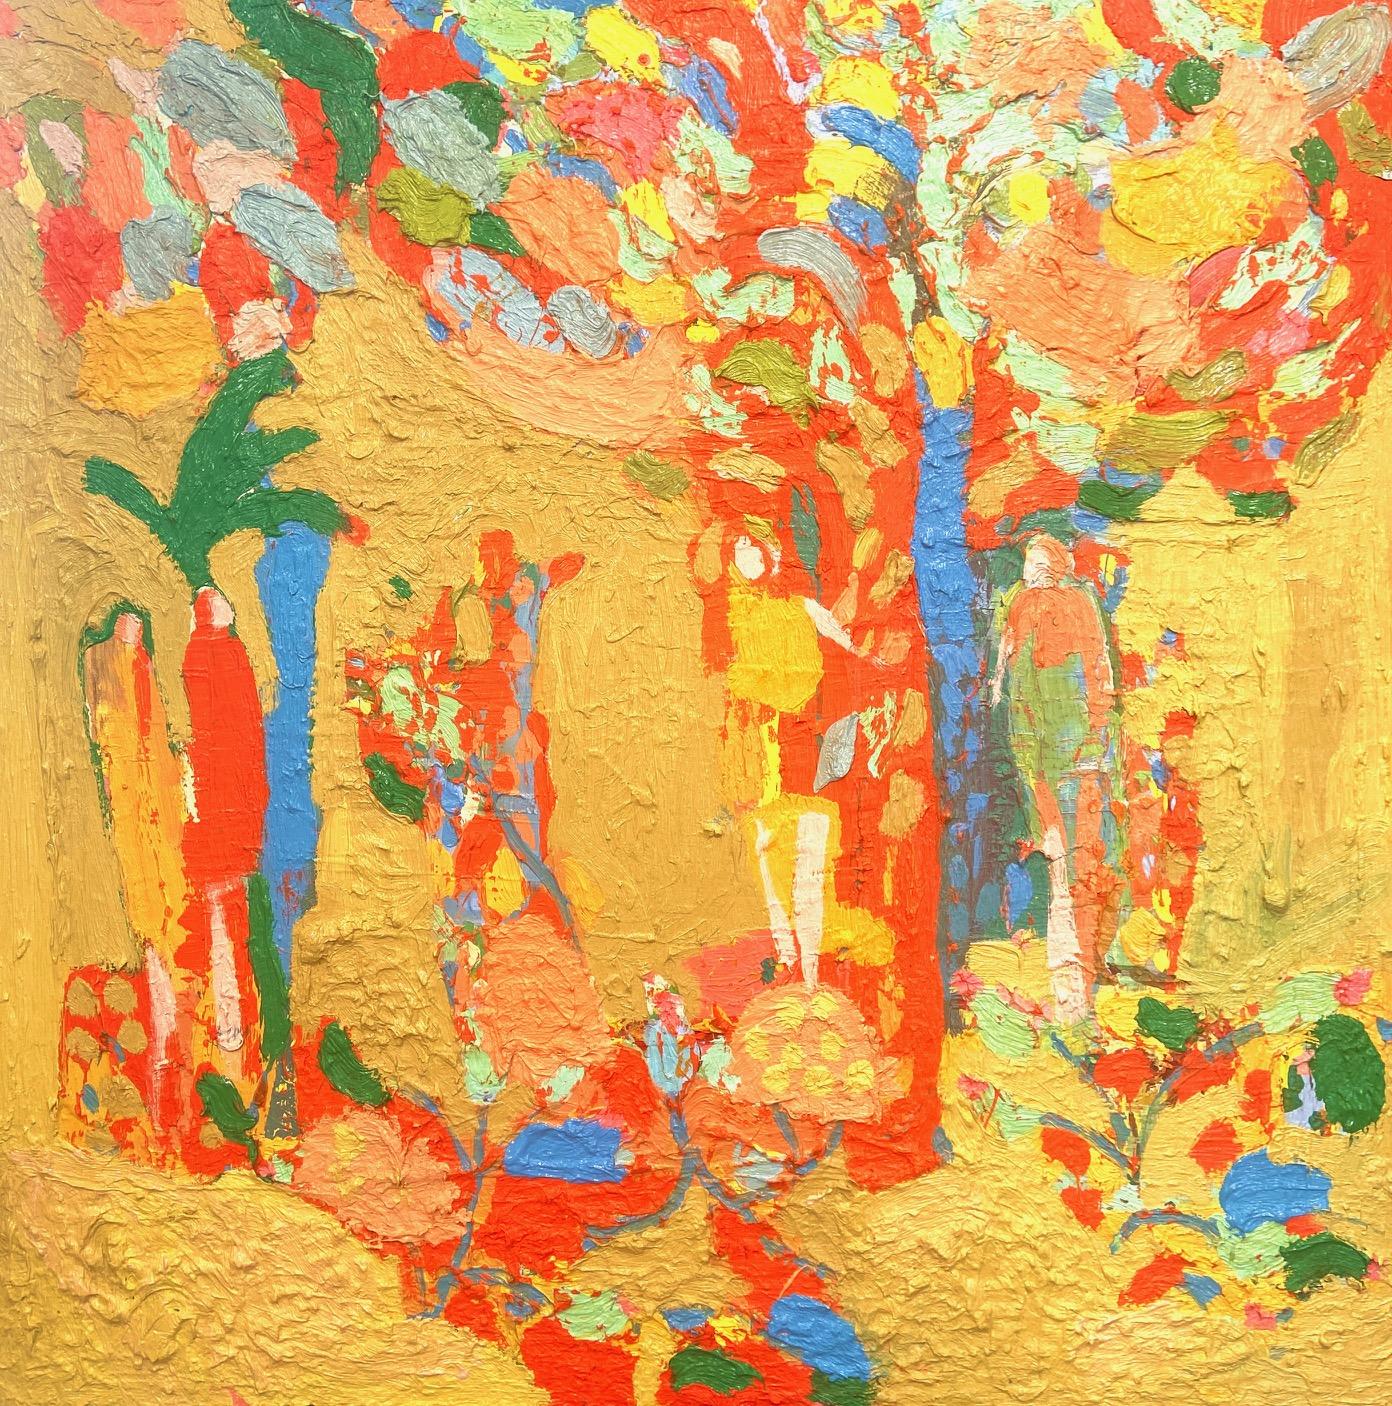 Orange Tree, Contemporary Expressionist Oil Painting